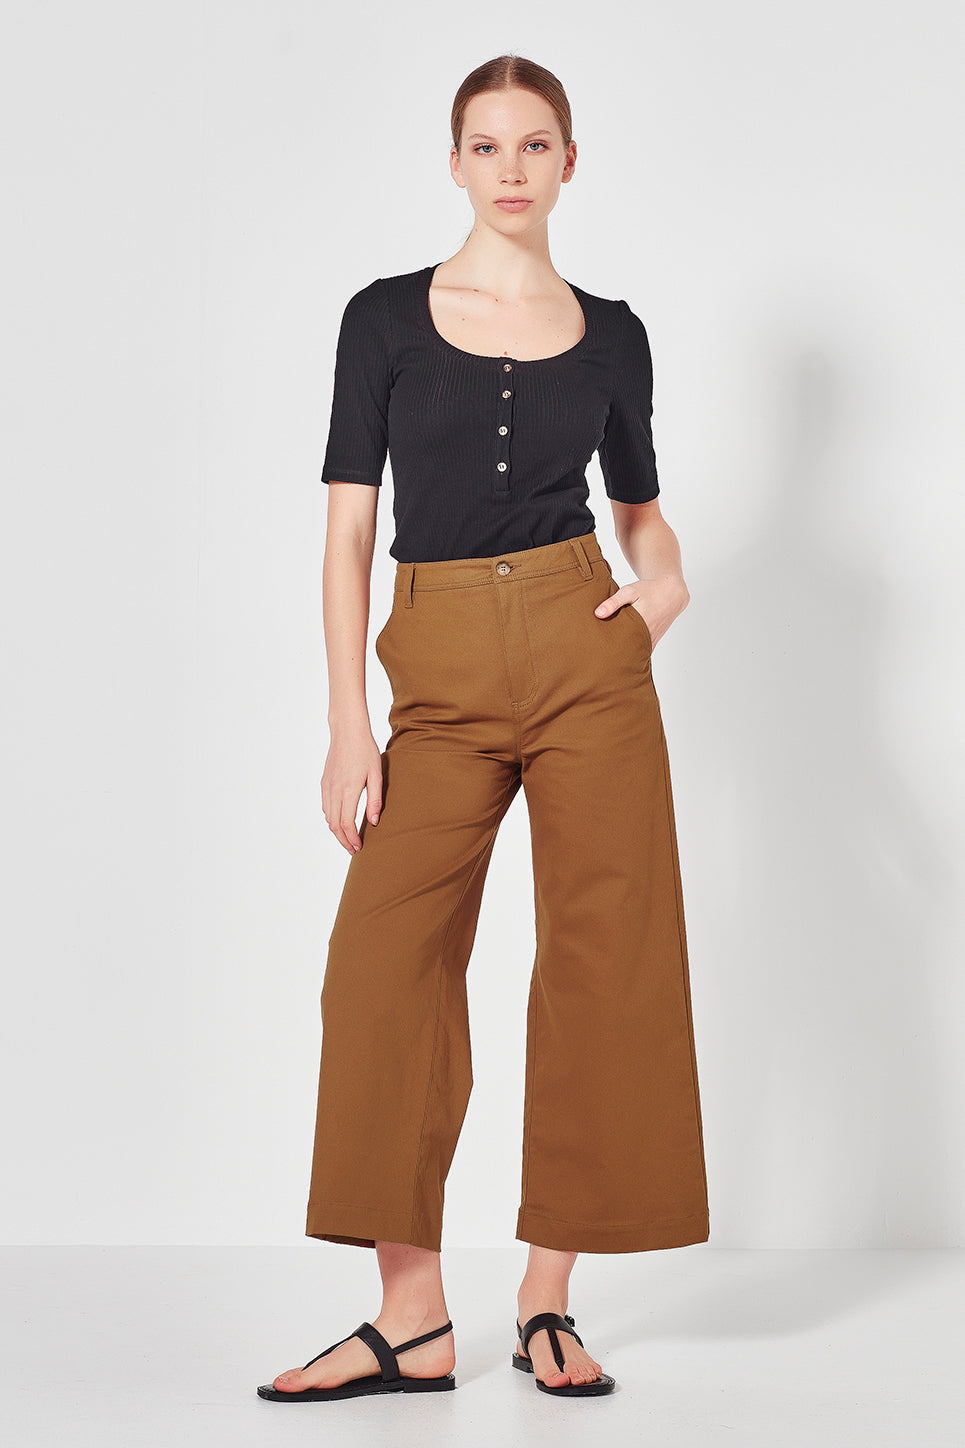 The Dryden Pant in Tobacco